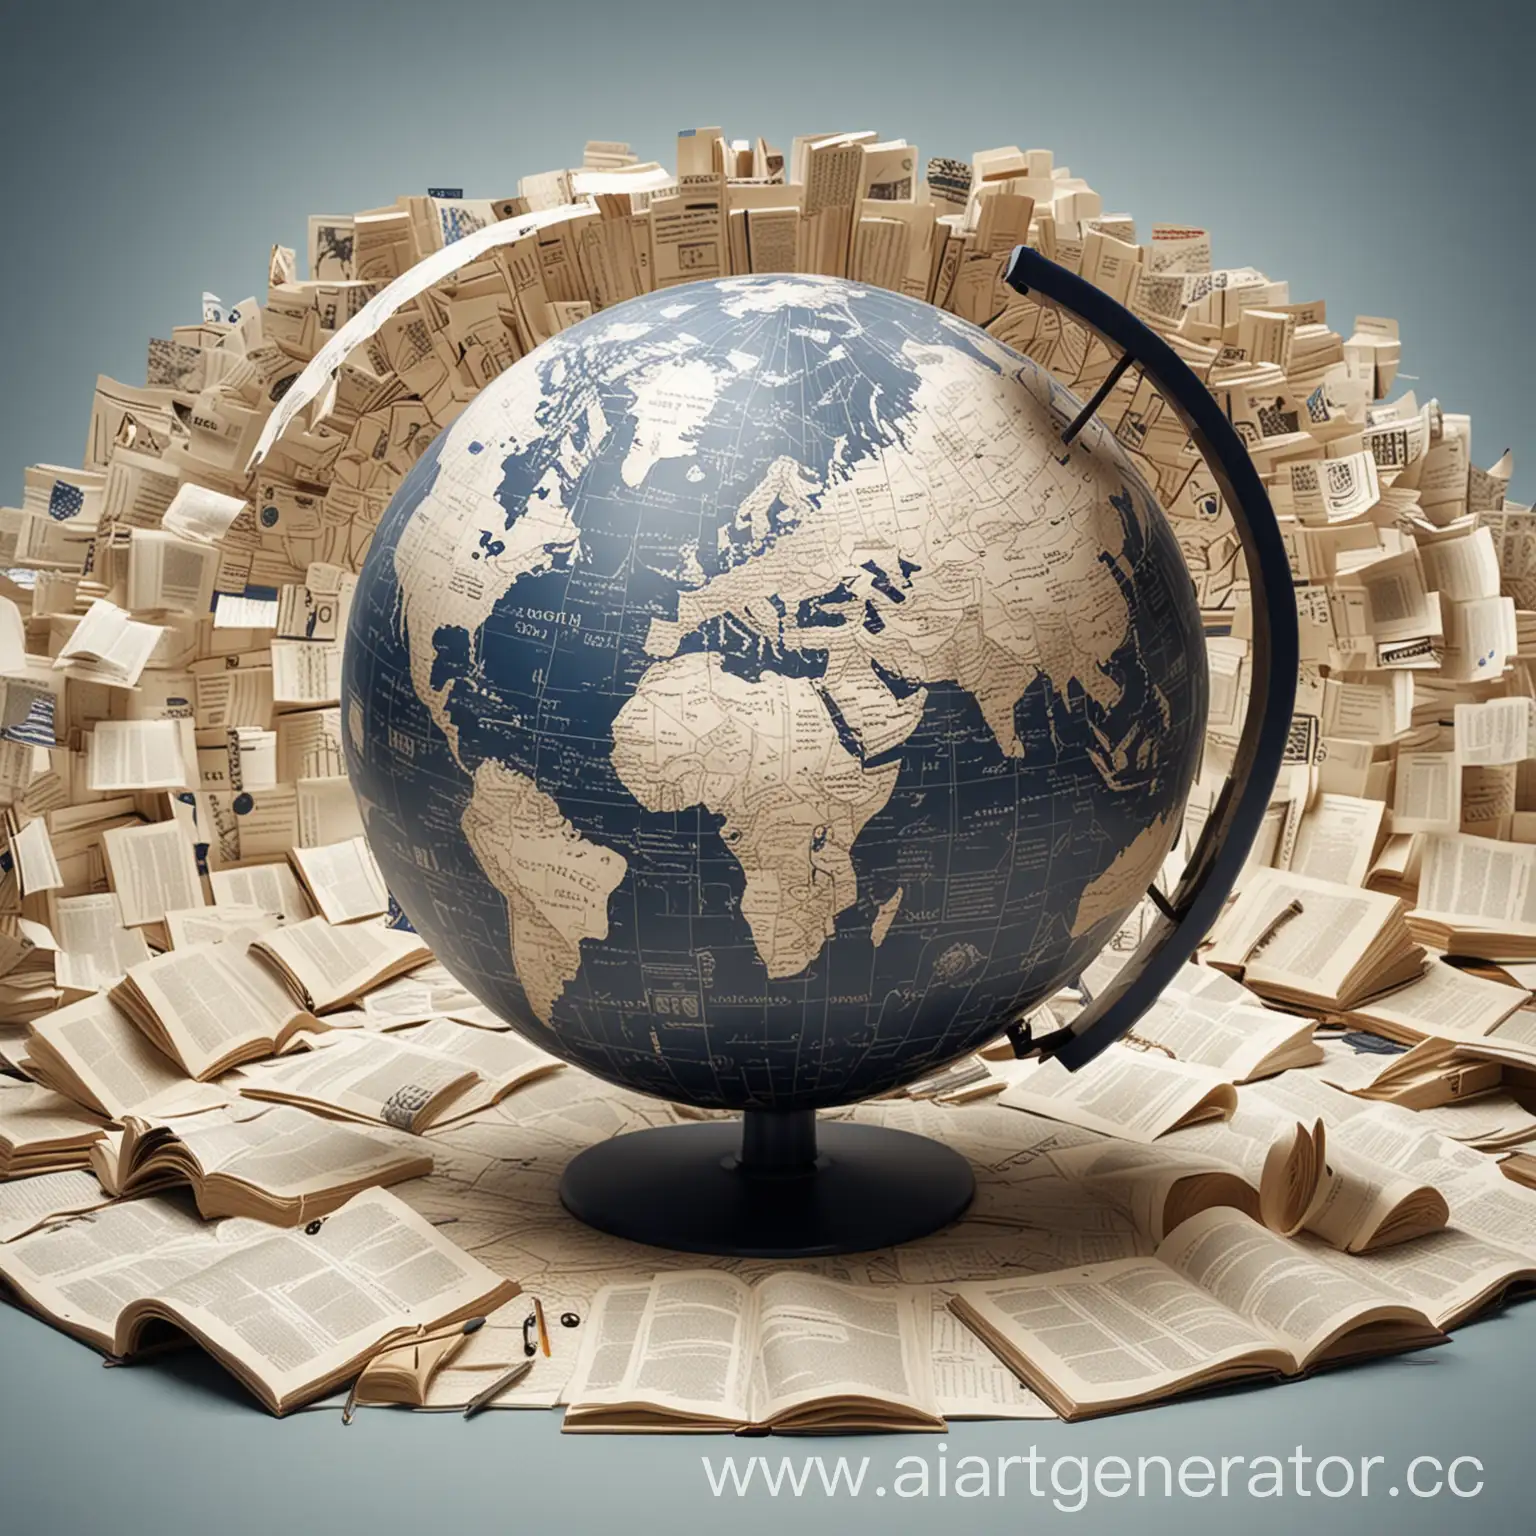 Global-Communication-and-Translation-Services-World-Map-and-Multilingual-Icons